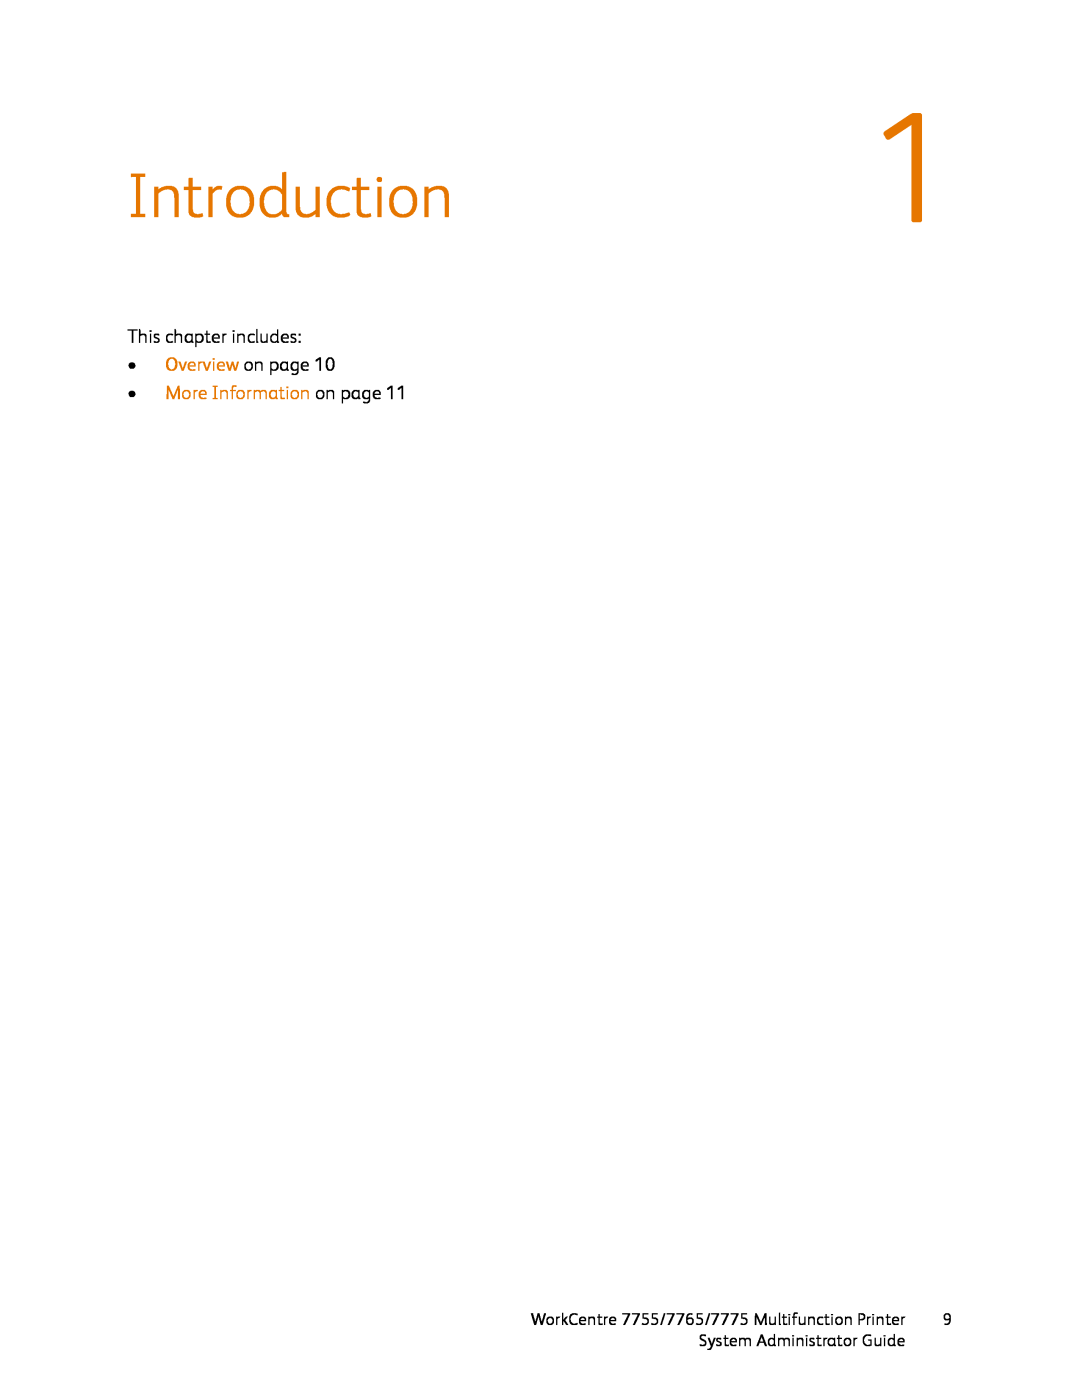 Xerox 7765, 7755, 7775 manual Introduction1, This chapter includes •Overview on page, •More Information on page 